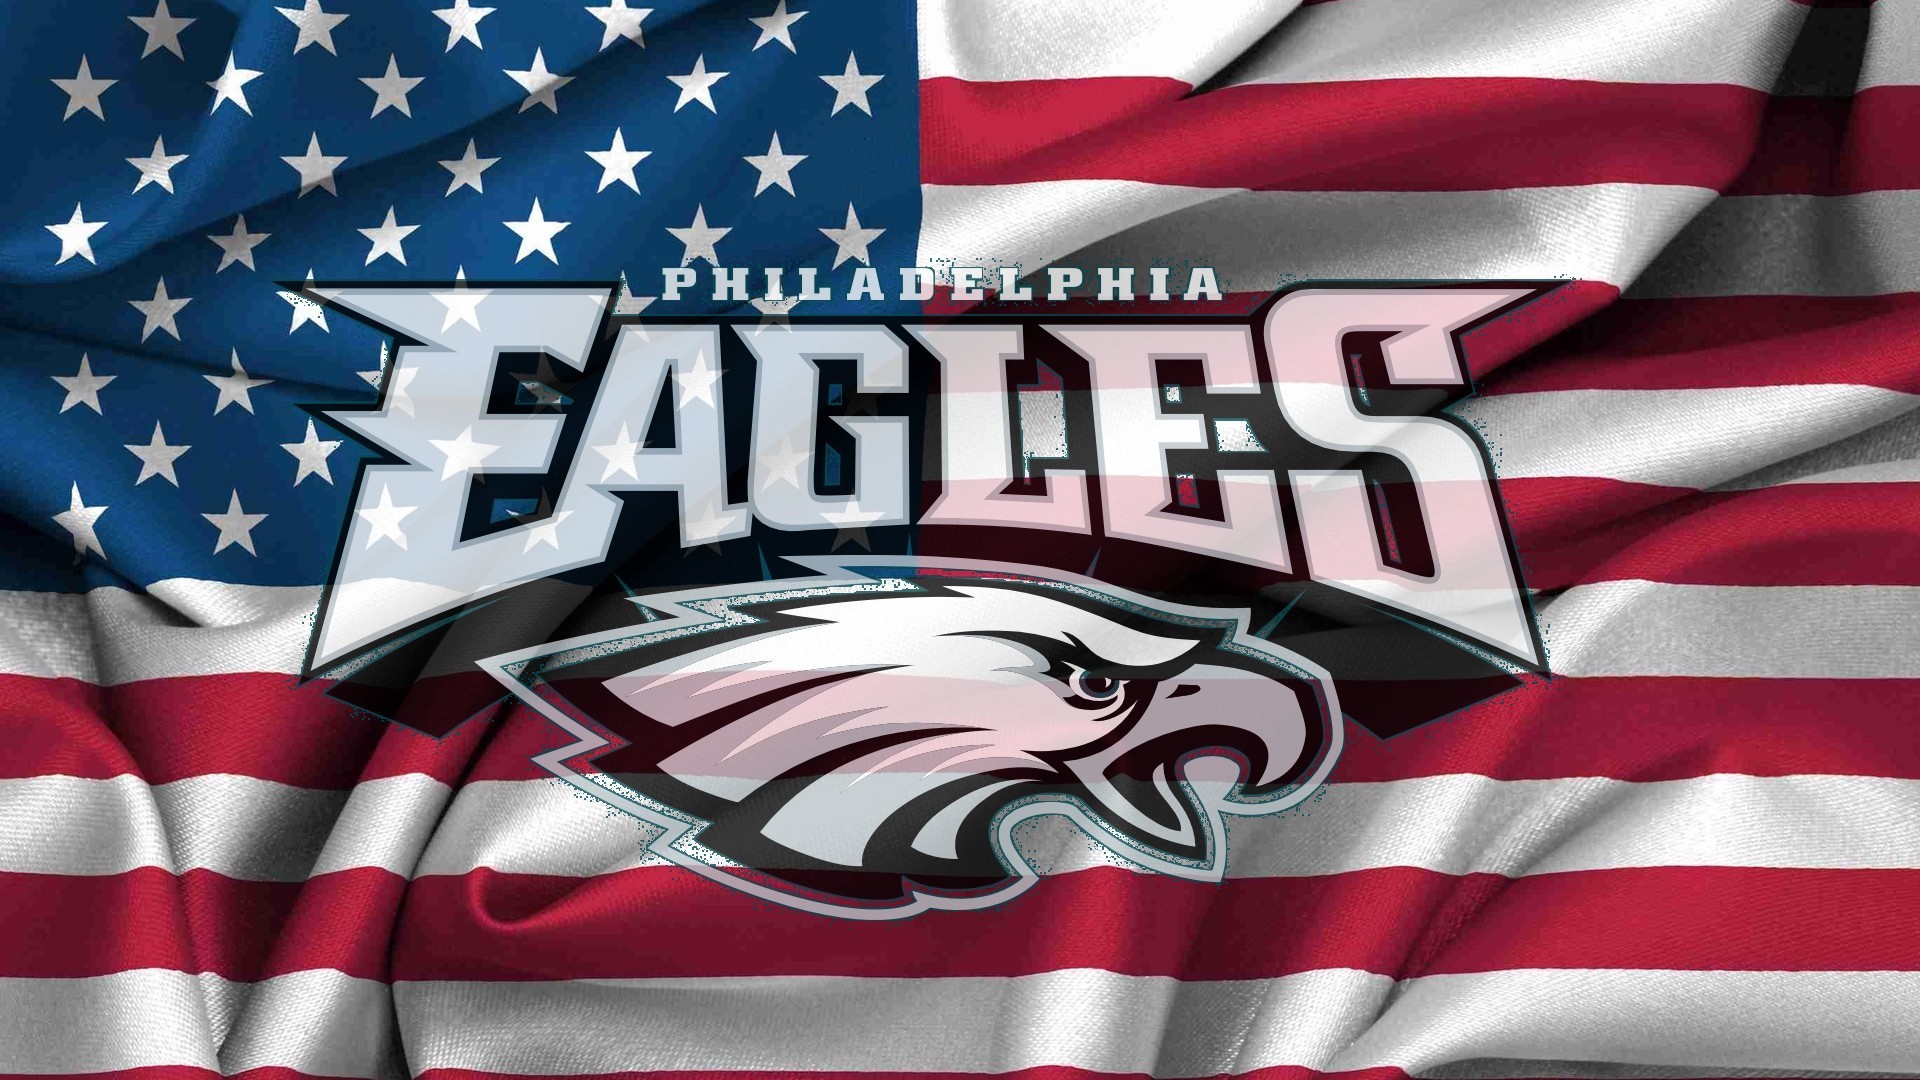 NFL Eagles HD Wallpapers with resolution 1920x1080 pixel. You can make this wallpaper for your Mac or Windows Desktop Background, iPhone, Android or Tablet and another Smartphone device